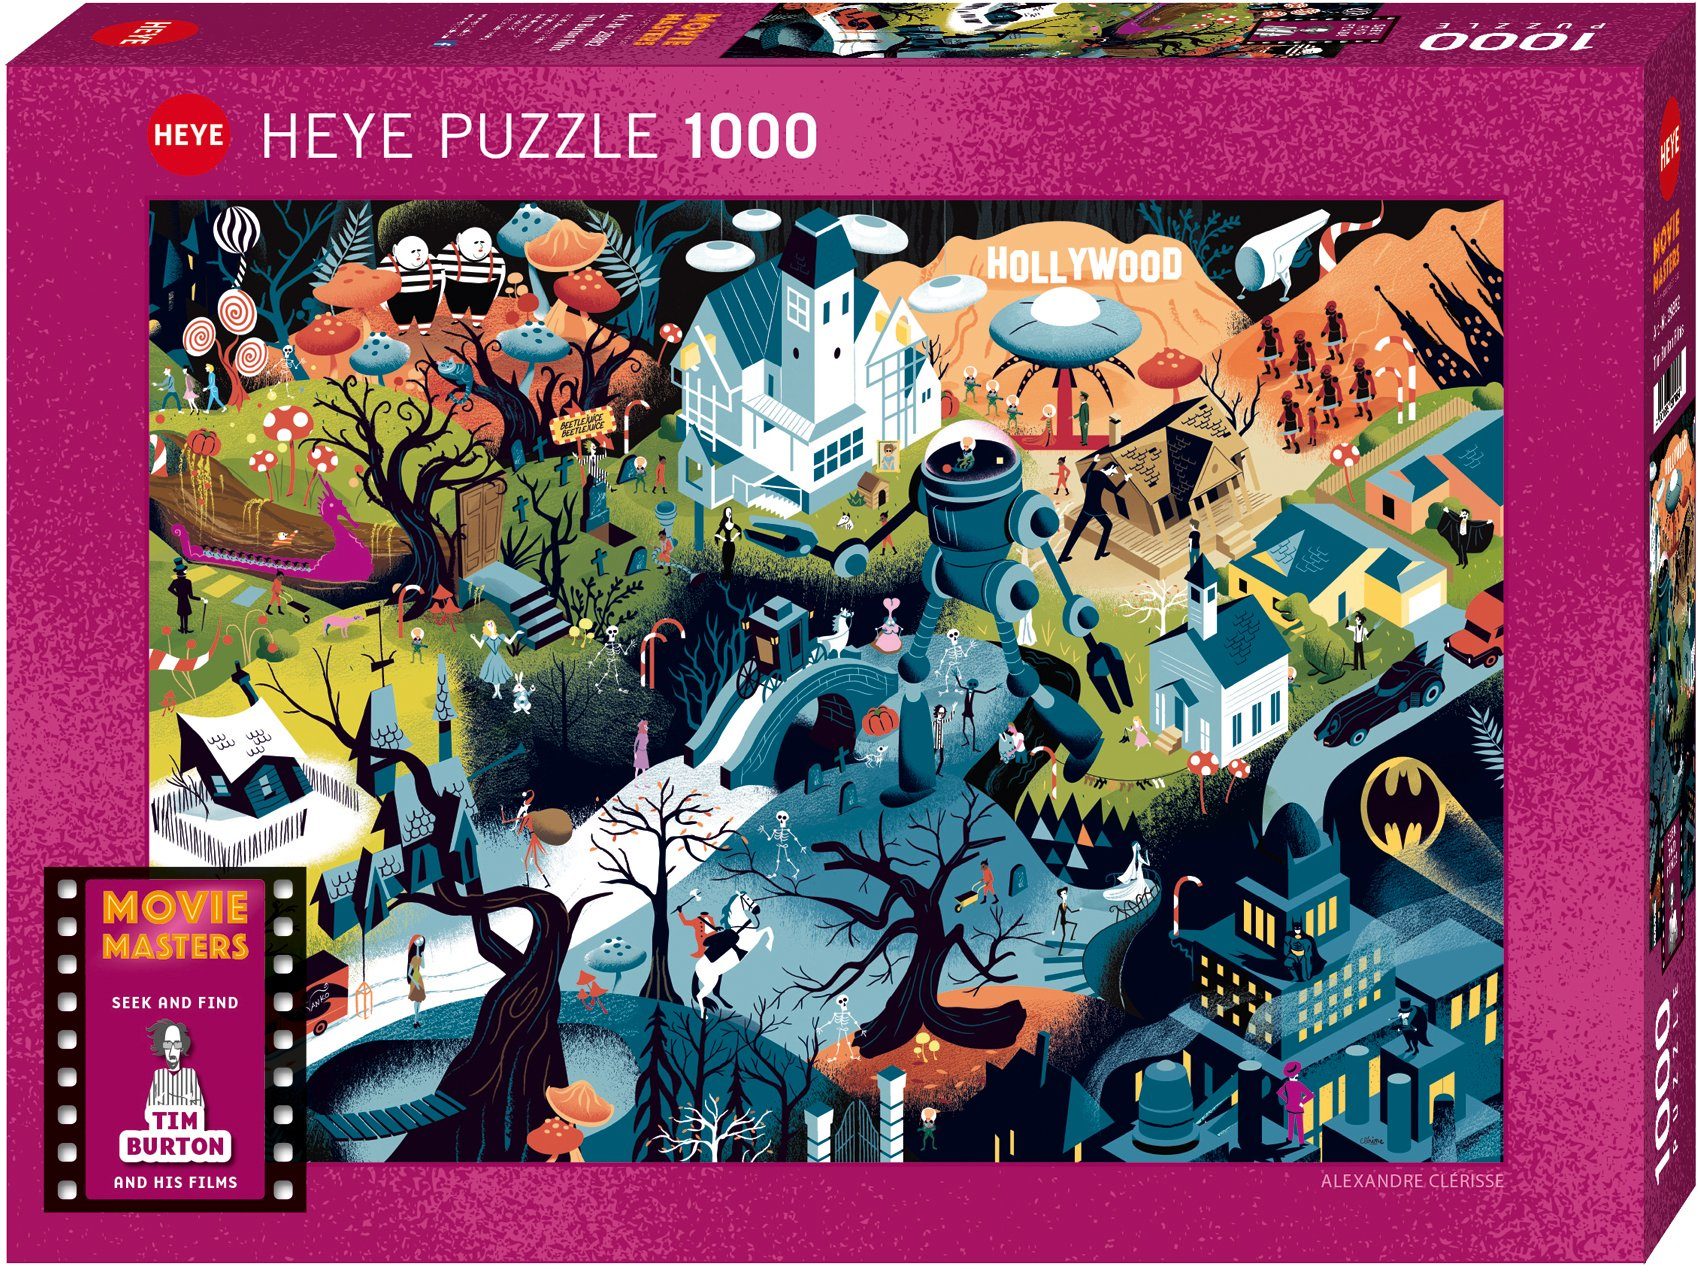 HEYE Puzzle Puzzleteile, Burton in 1000 Films, Germany Made Tim